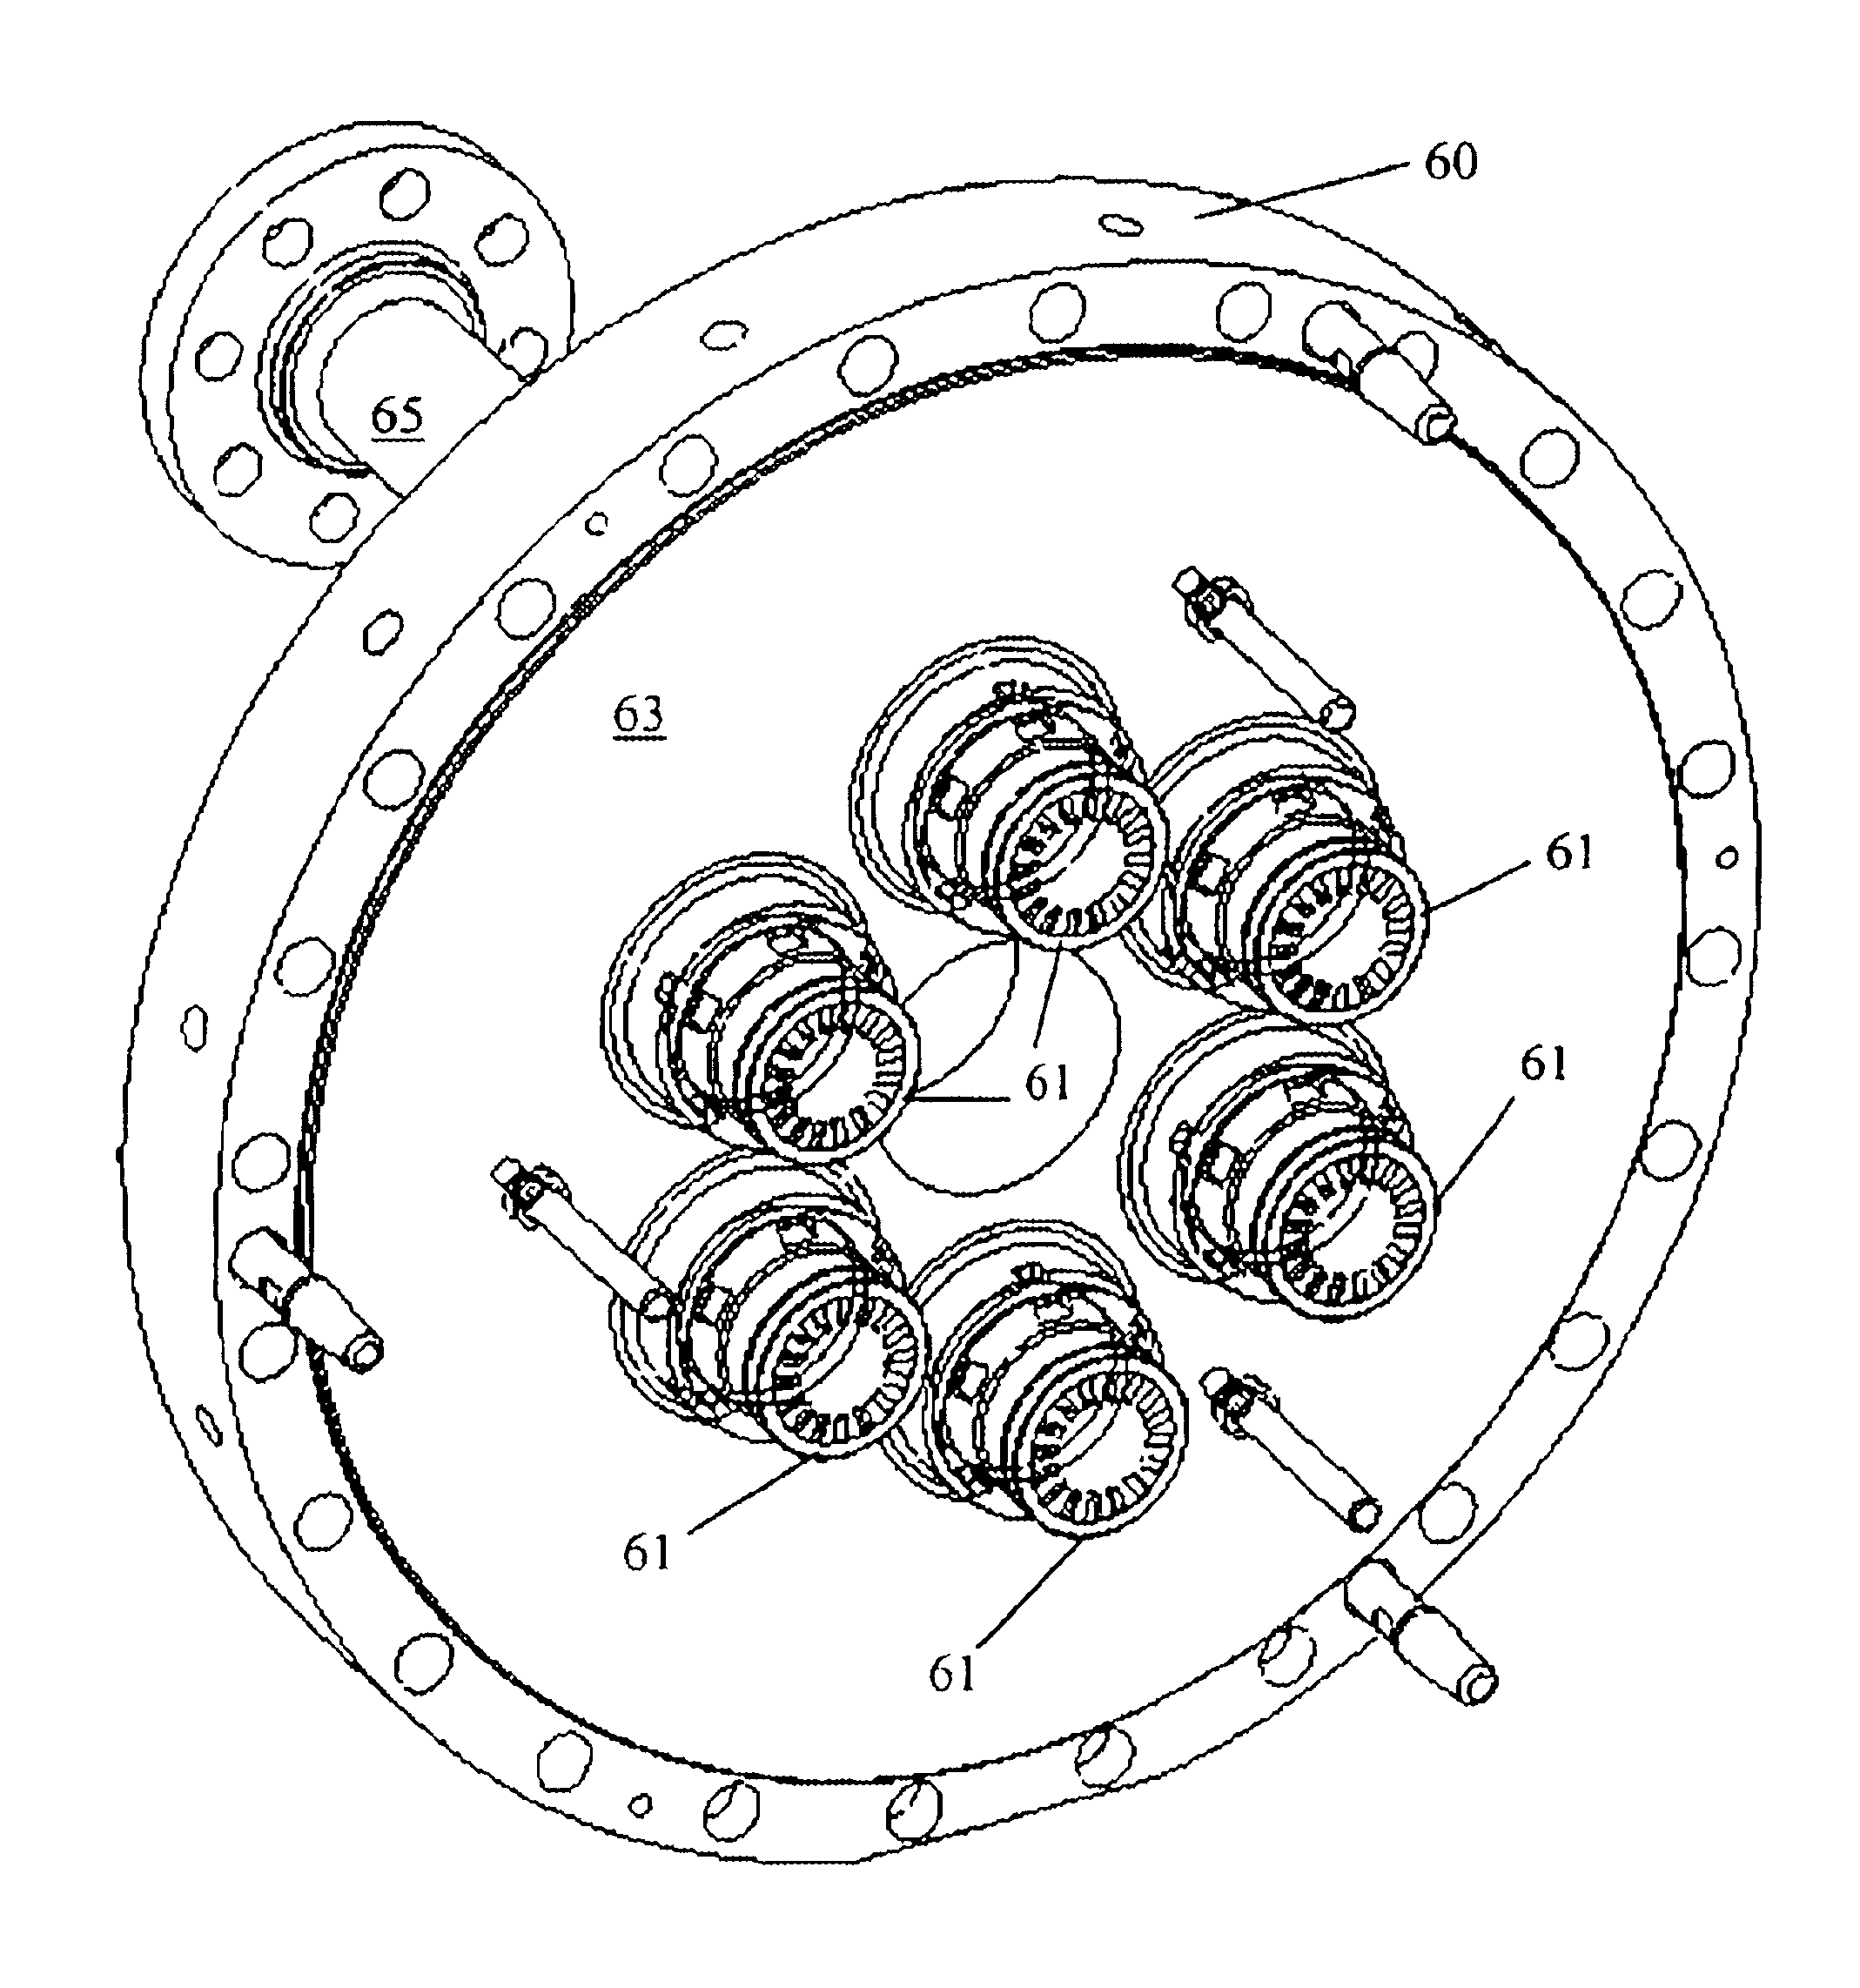 Method of fuel nozzle sizing and sequencing for a gas turbine combustor